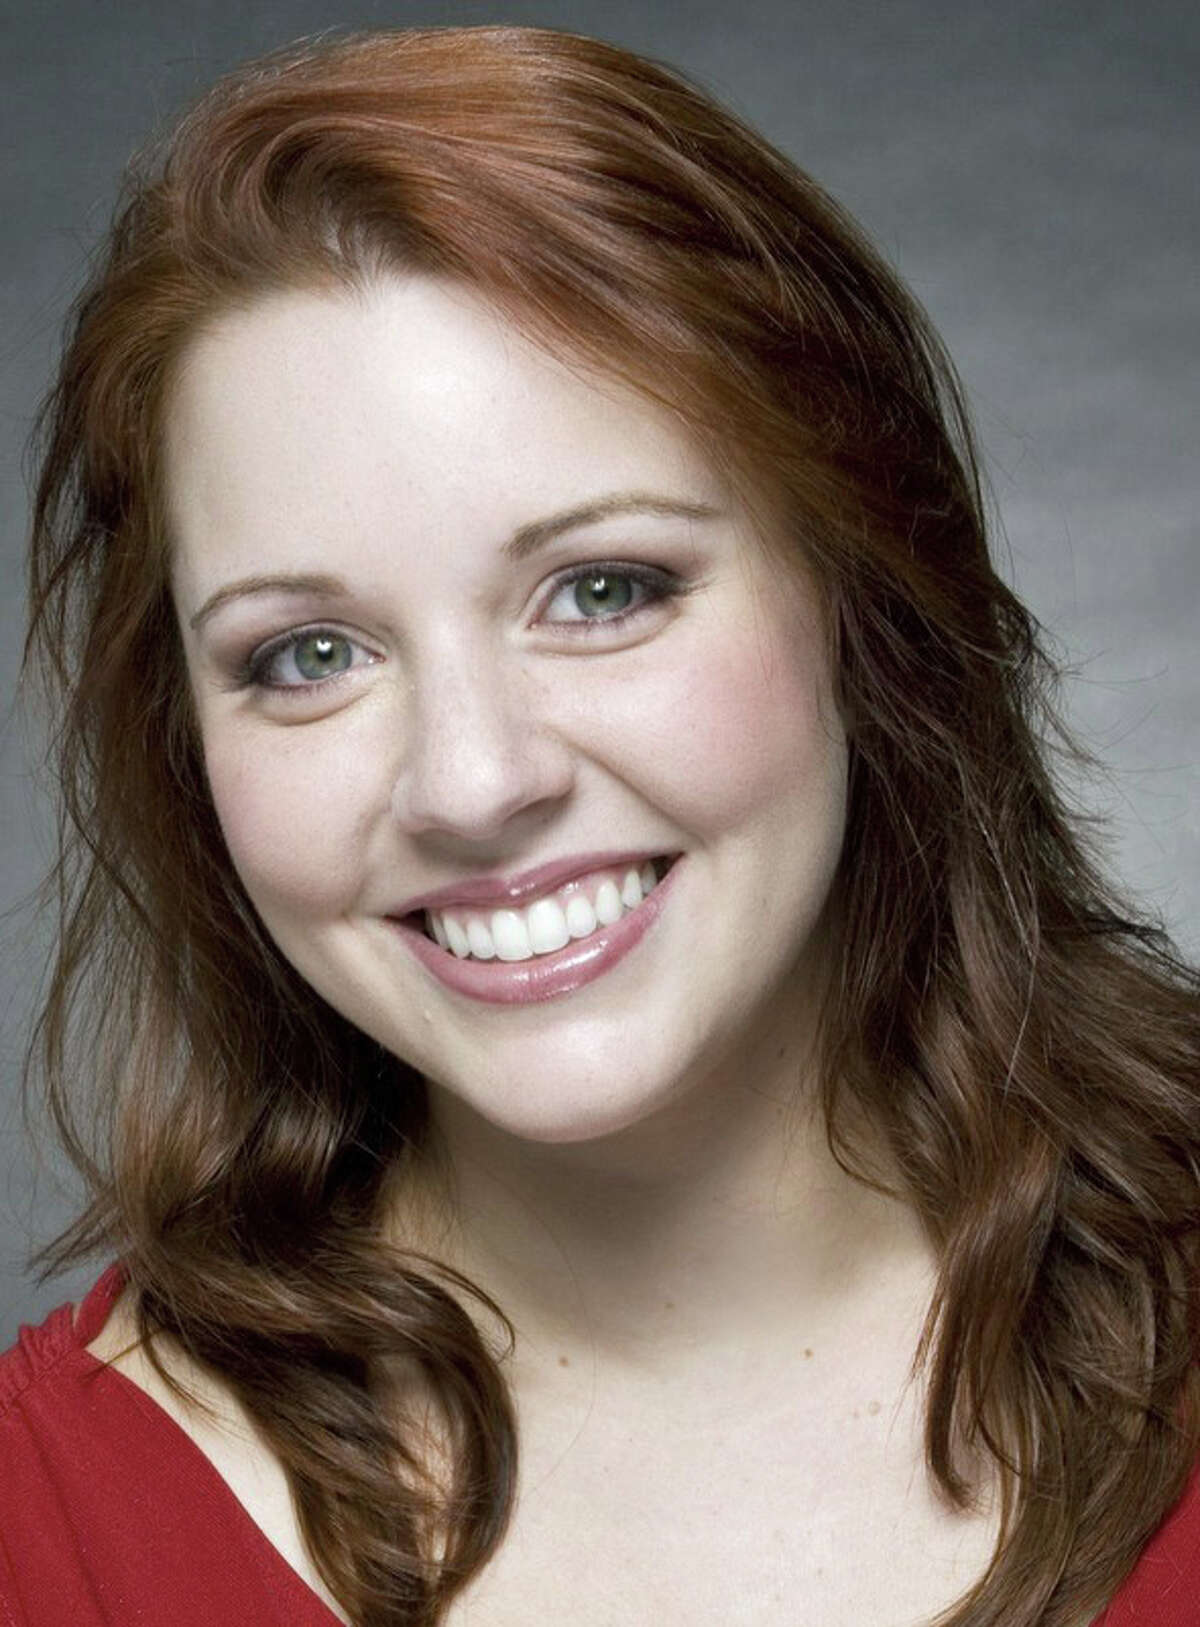 Soprano Halley Gilbert will be the featured soloist at performances of the Greenwich Symphony at 8 p.m. Nov. 21 and 4 p.m. Nov. 22 in the new performance space at Greenwich High School. Gilbert won the 2011 Jenny Lind Competition and was a regional finalist in the Metropolitan Opera National Council Auditions in 2009. A free, pre-concert lecture will be given one hour before each performance. Tickets are $35 for adults, $10 for students. For tickets and information, call 203-869-2664 or visit greenwichsymphony.org.